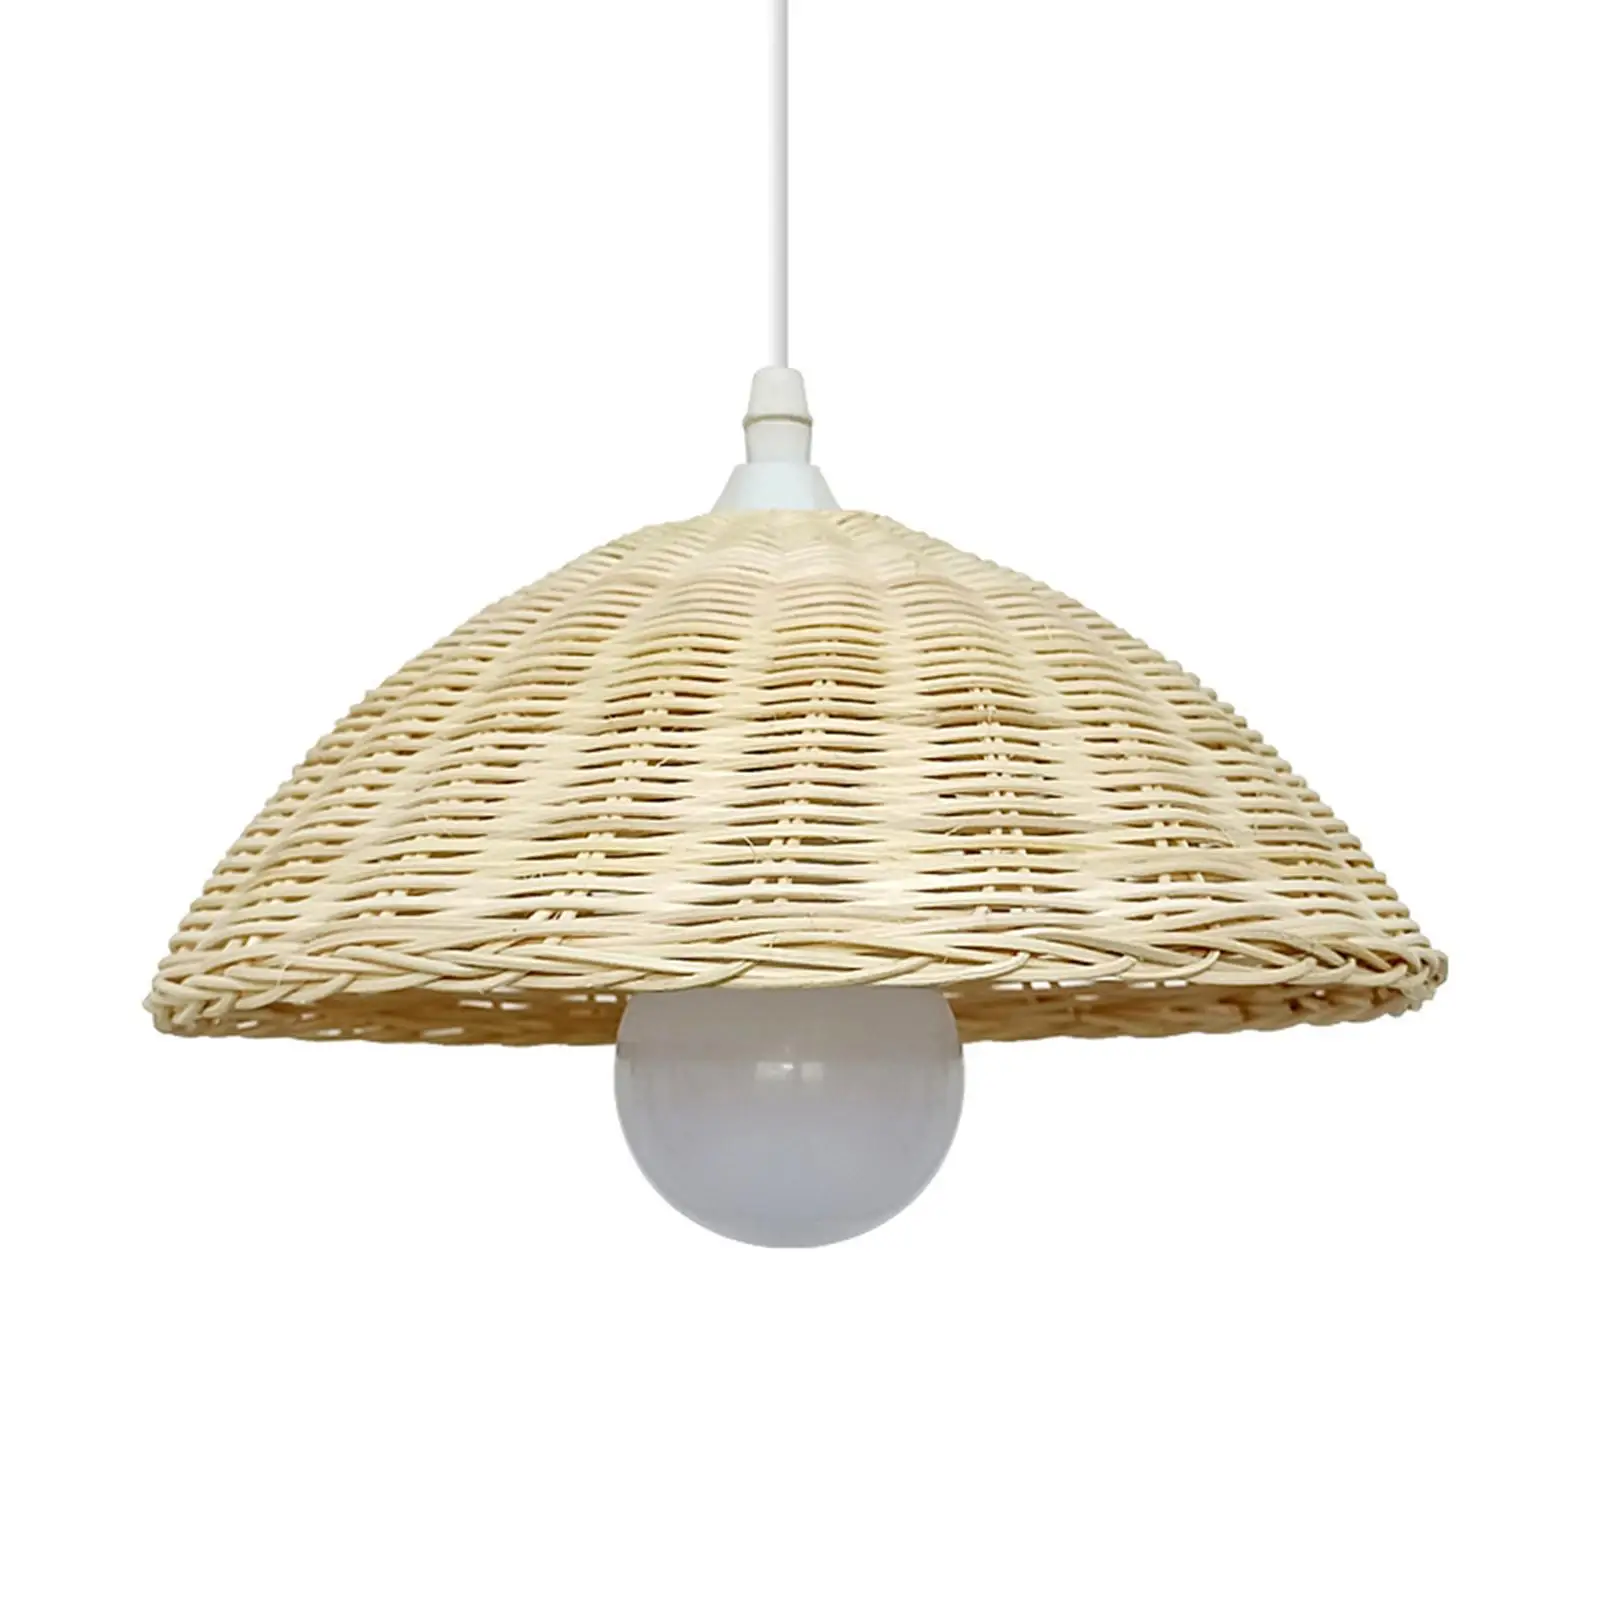 Bamboo Lamp Shade Ceiling Light Bamboo Dome Shade for Teahouse Dining Room Restaurant